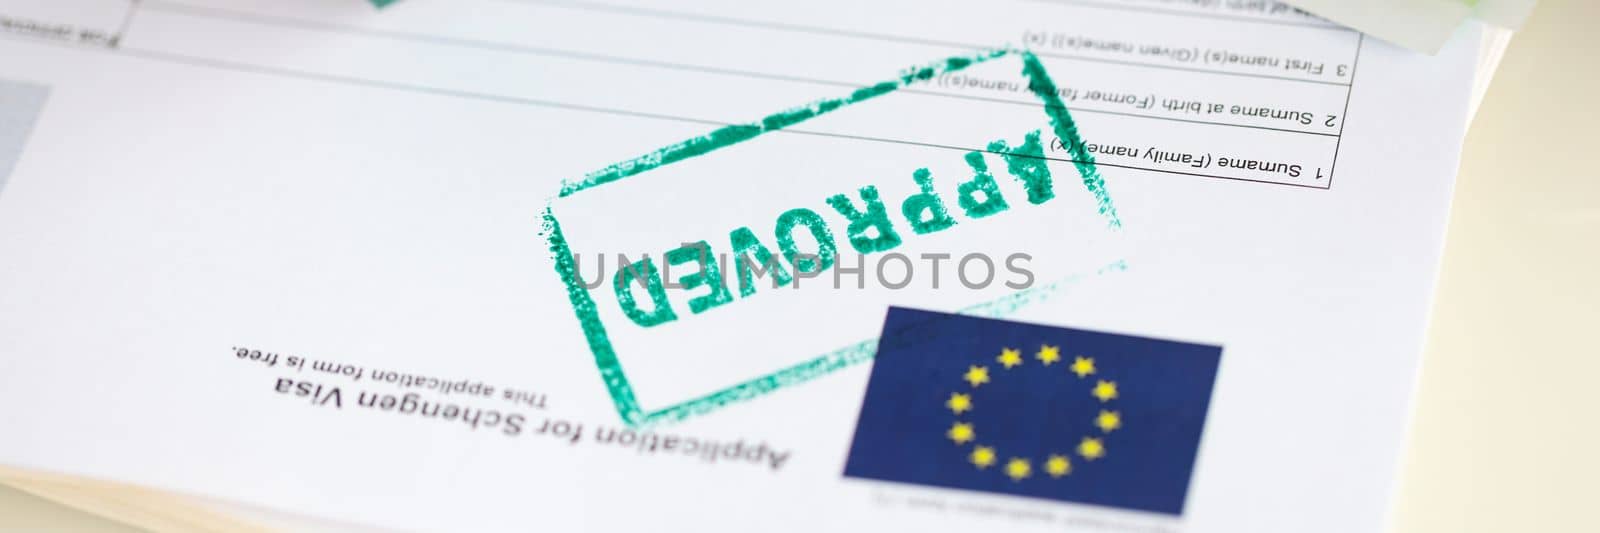 Approved EU visa application and cash euro banknotes. Obtaining visa to Europe and moving to European country